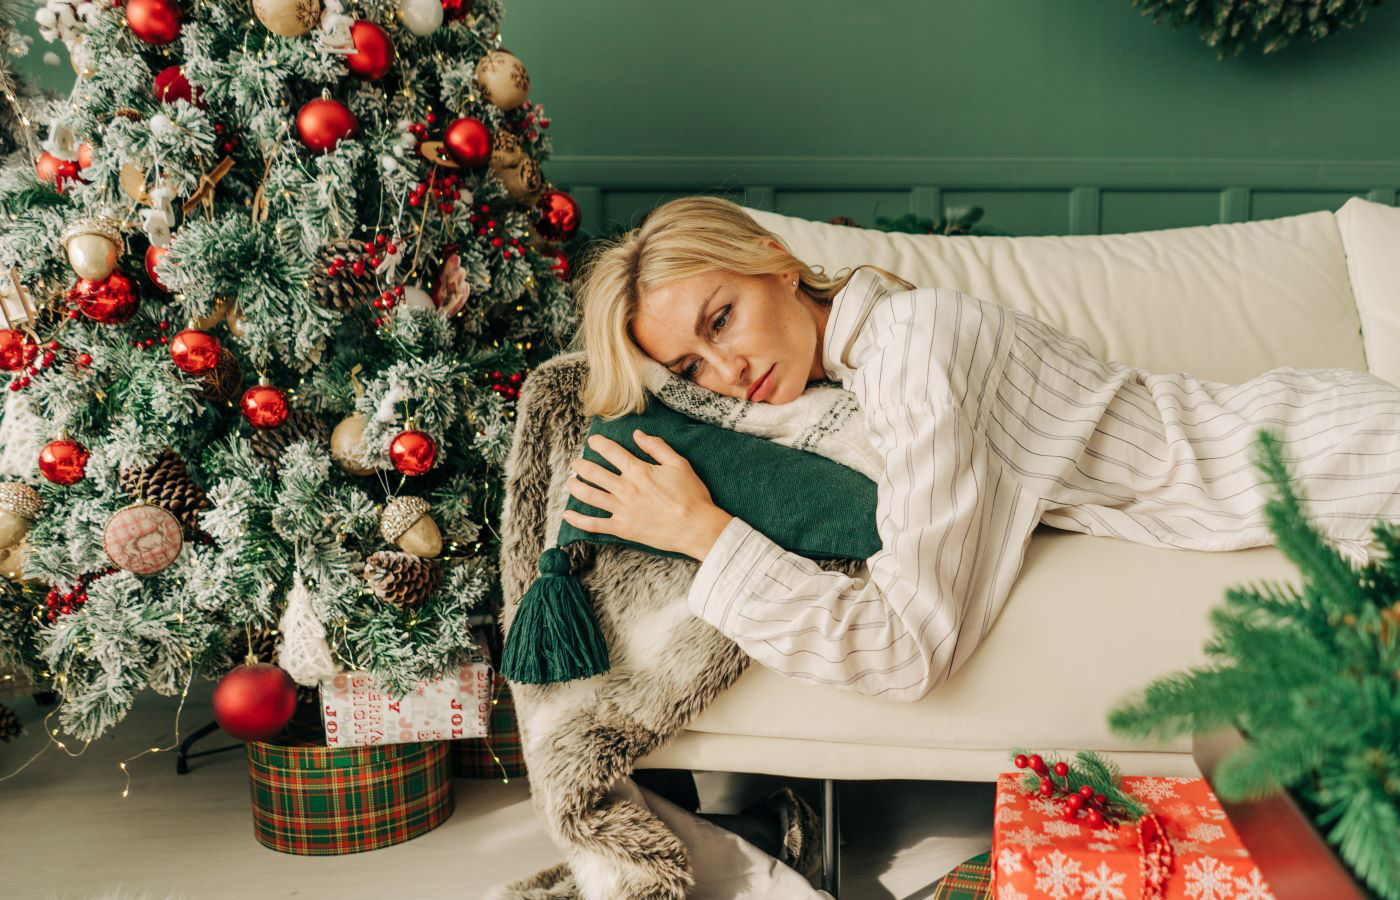 From fighting crowds to battling pie crust, the holidays can be exhausting. But is there more you can do to fend off that holiday fatigue?